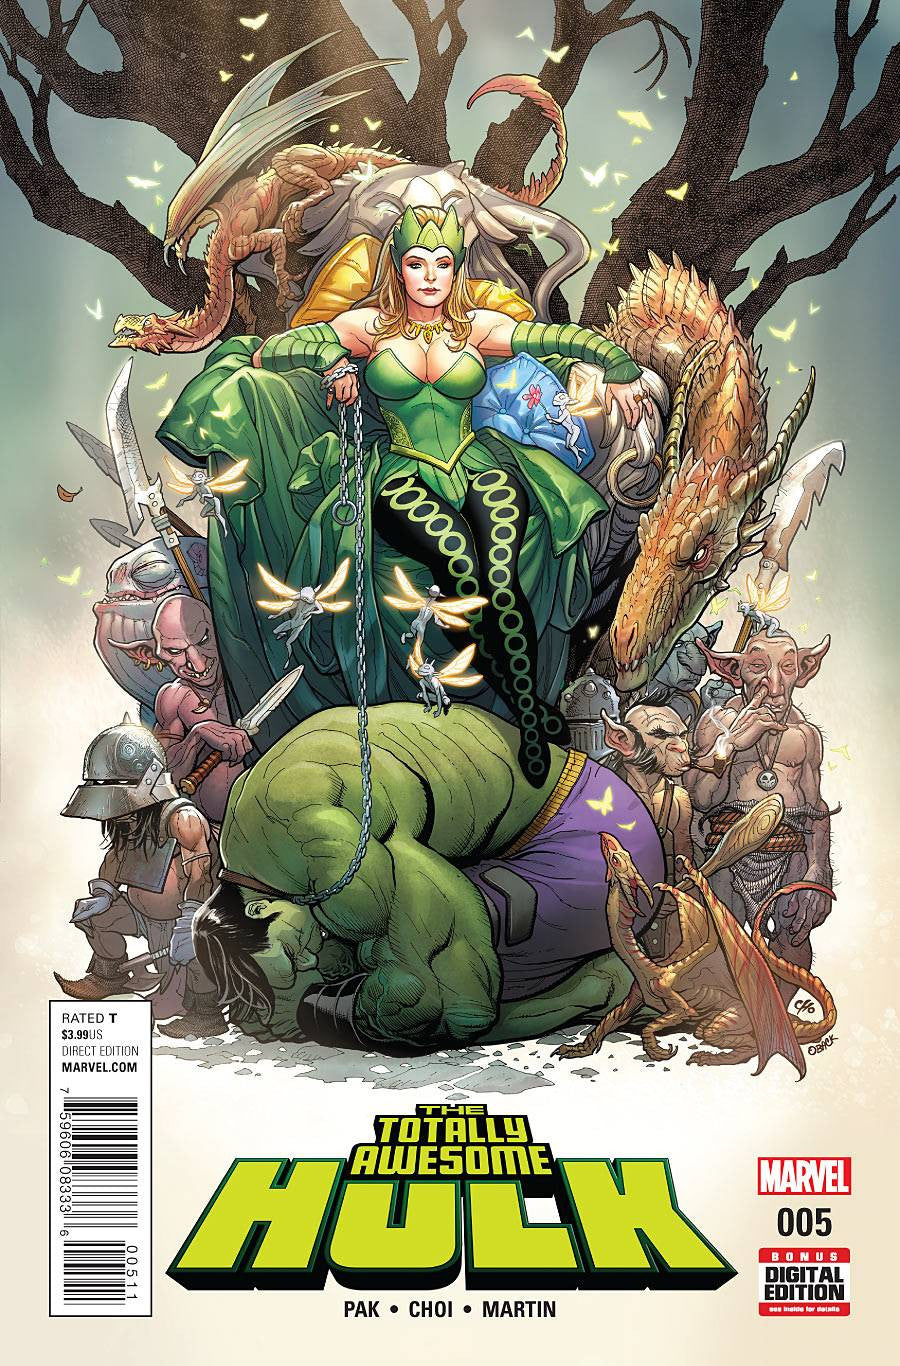 TOTALLY AWESOME HULK #5 COVER